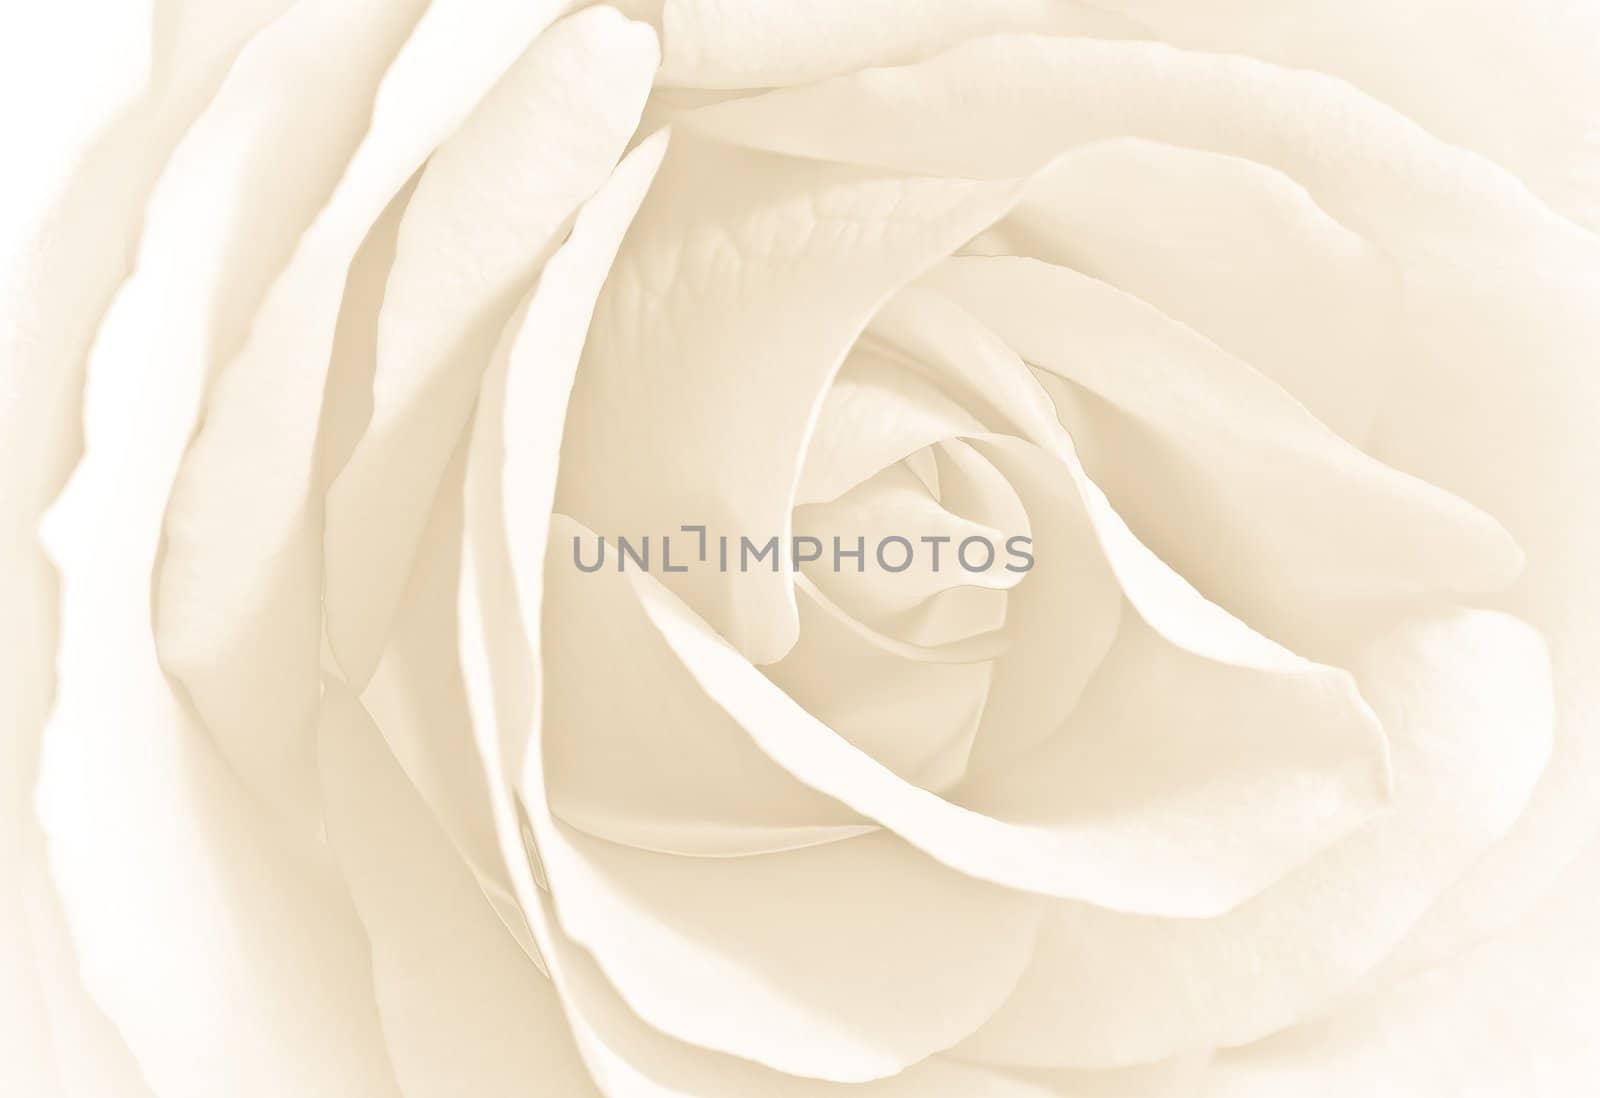 Soft white rose in close view-high key image